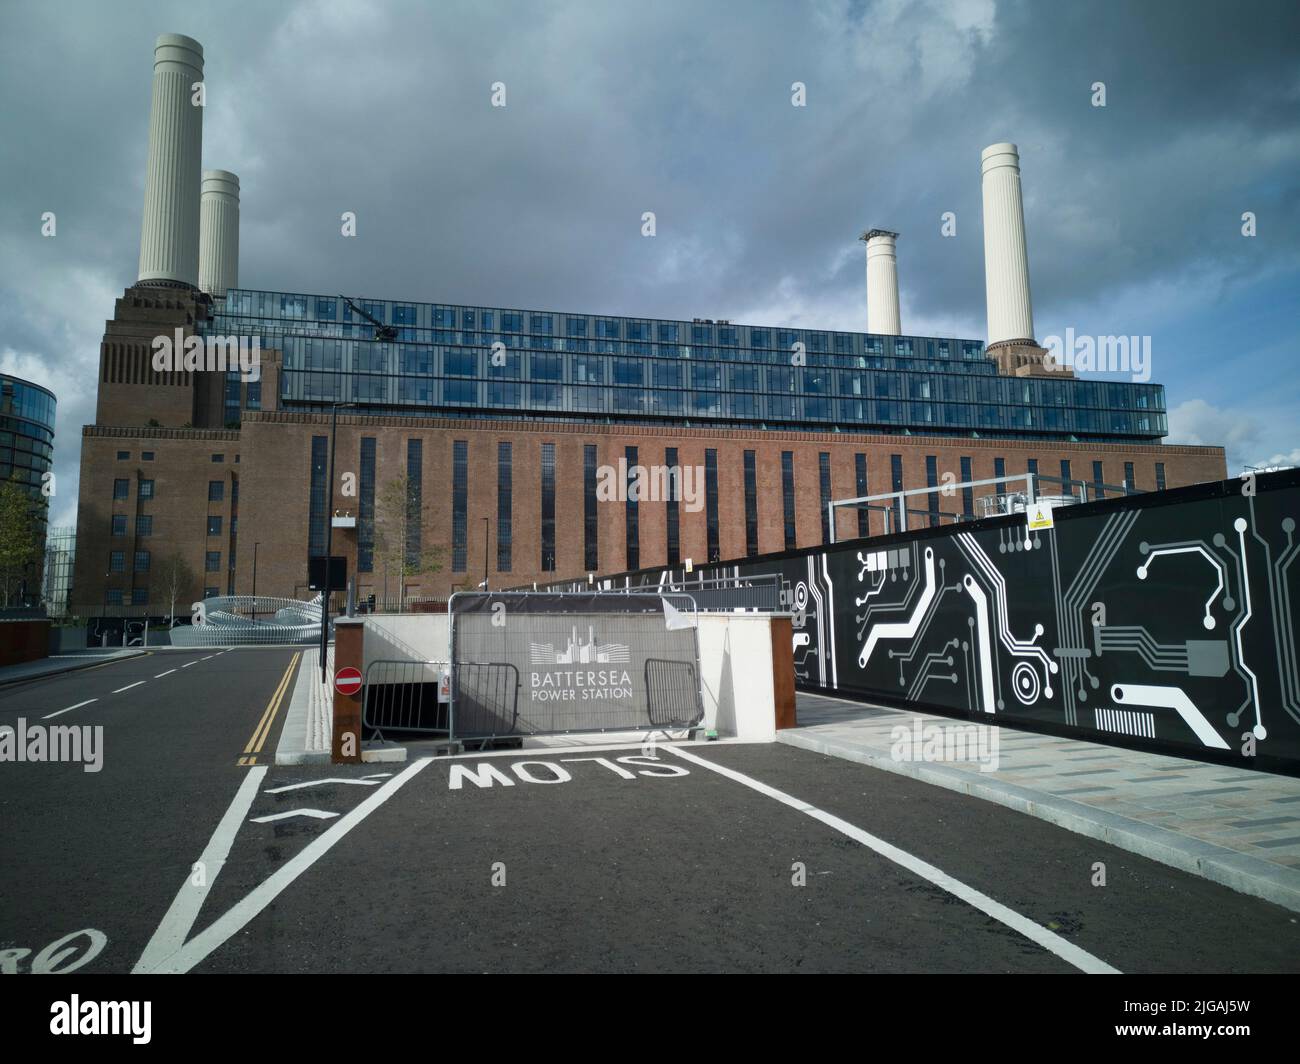 Around Battersea Power Station, London, UK, Oct 2021. Roadside approach to a full view of the repurposed Battersea Power Station,  London, SW8, England. Stock Photo